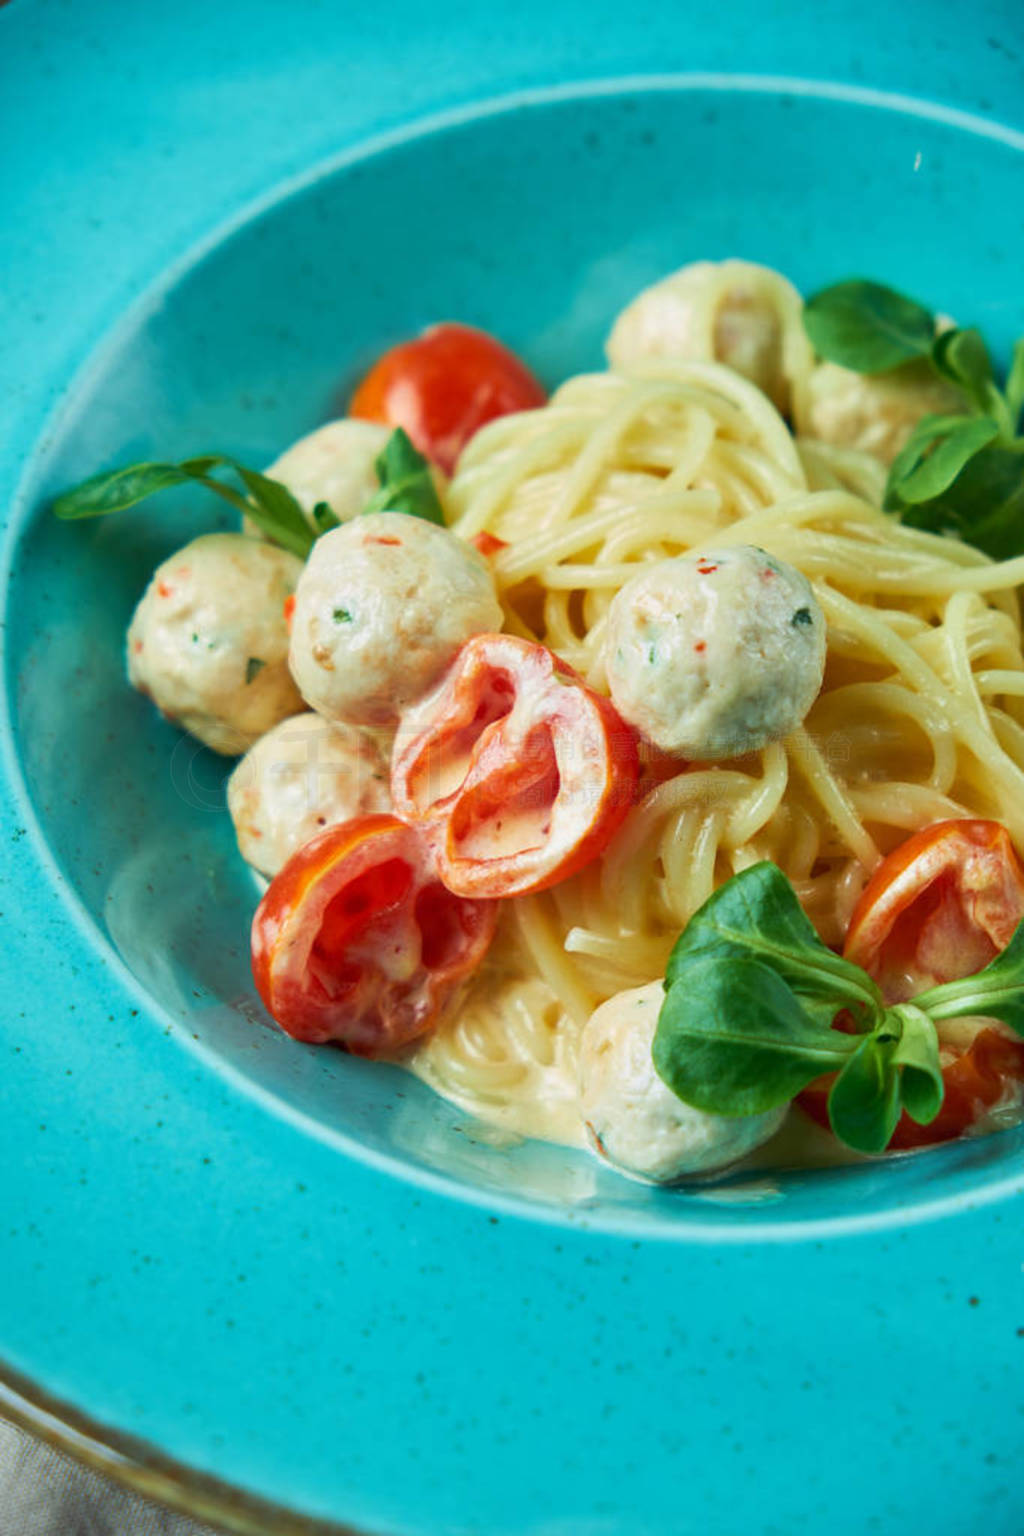 Childrens pasta with meatballs and basil among childrens toys